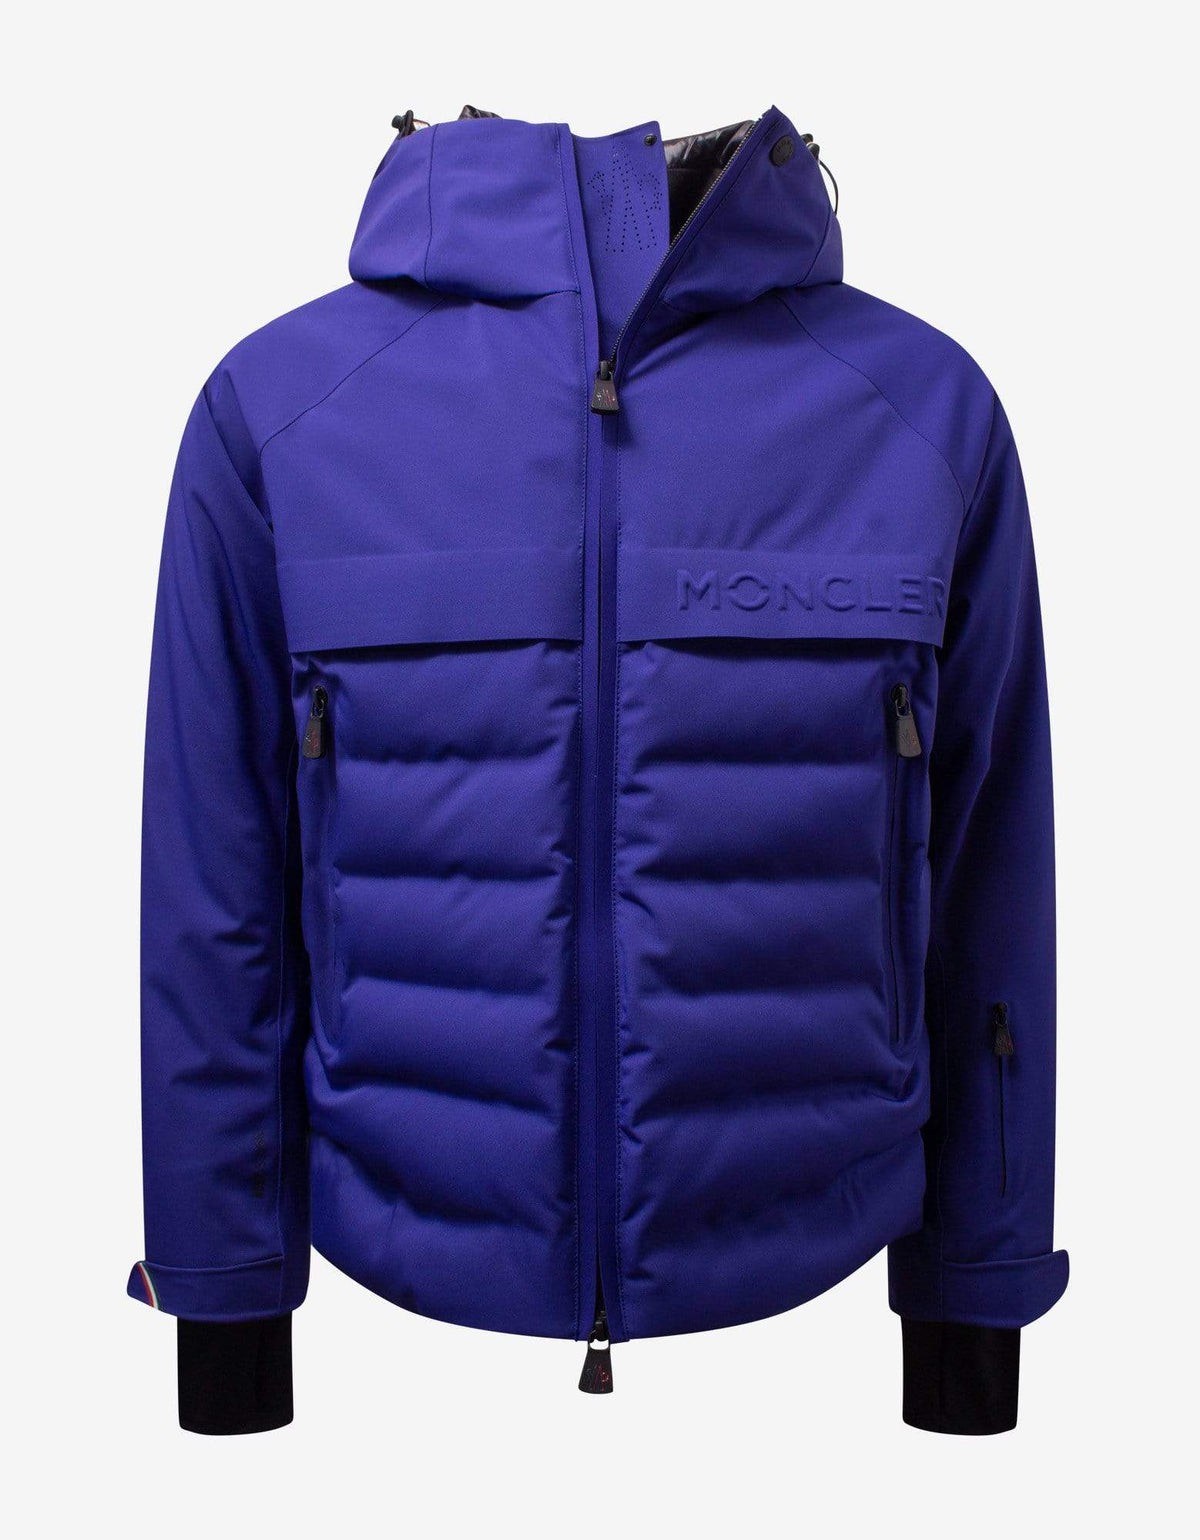 Moncler Grenoble Achensee Blue Down Jacket